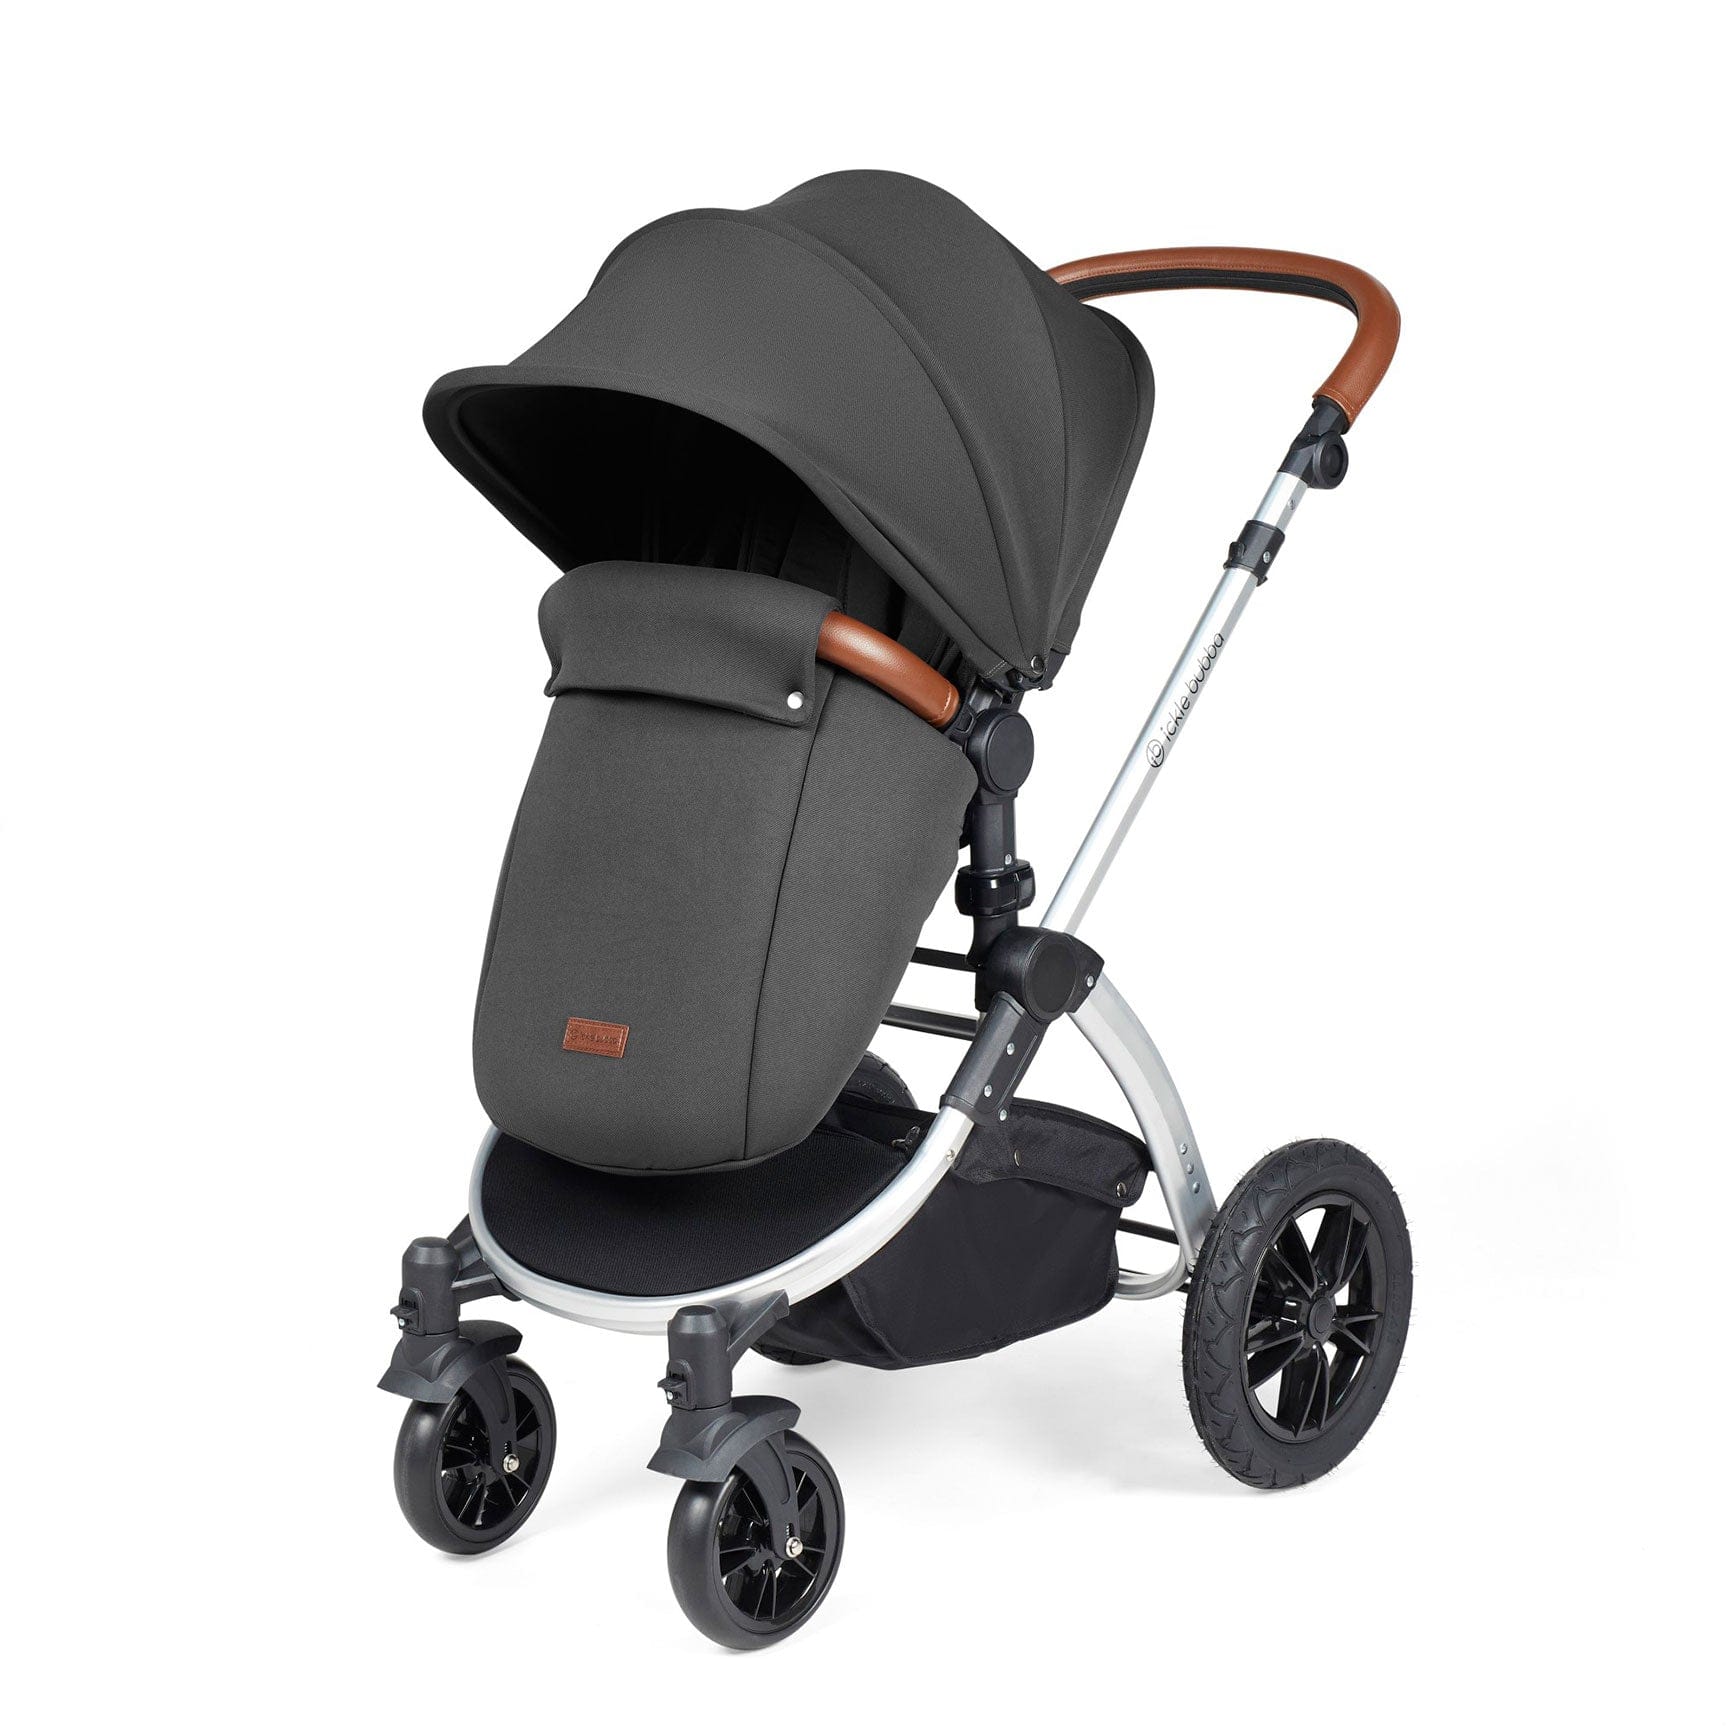 Ickle Bubba travel systems Ickle Bubba Stomp Luxe All-in-One Travel System with Isofix Base - Silver/Charcoal Grey/Tan 10-011-300-255